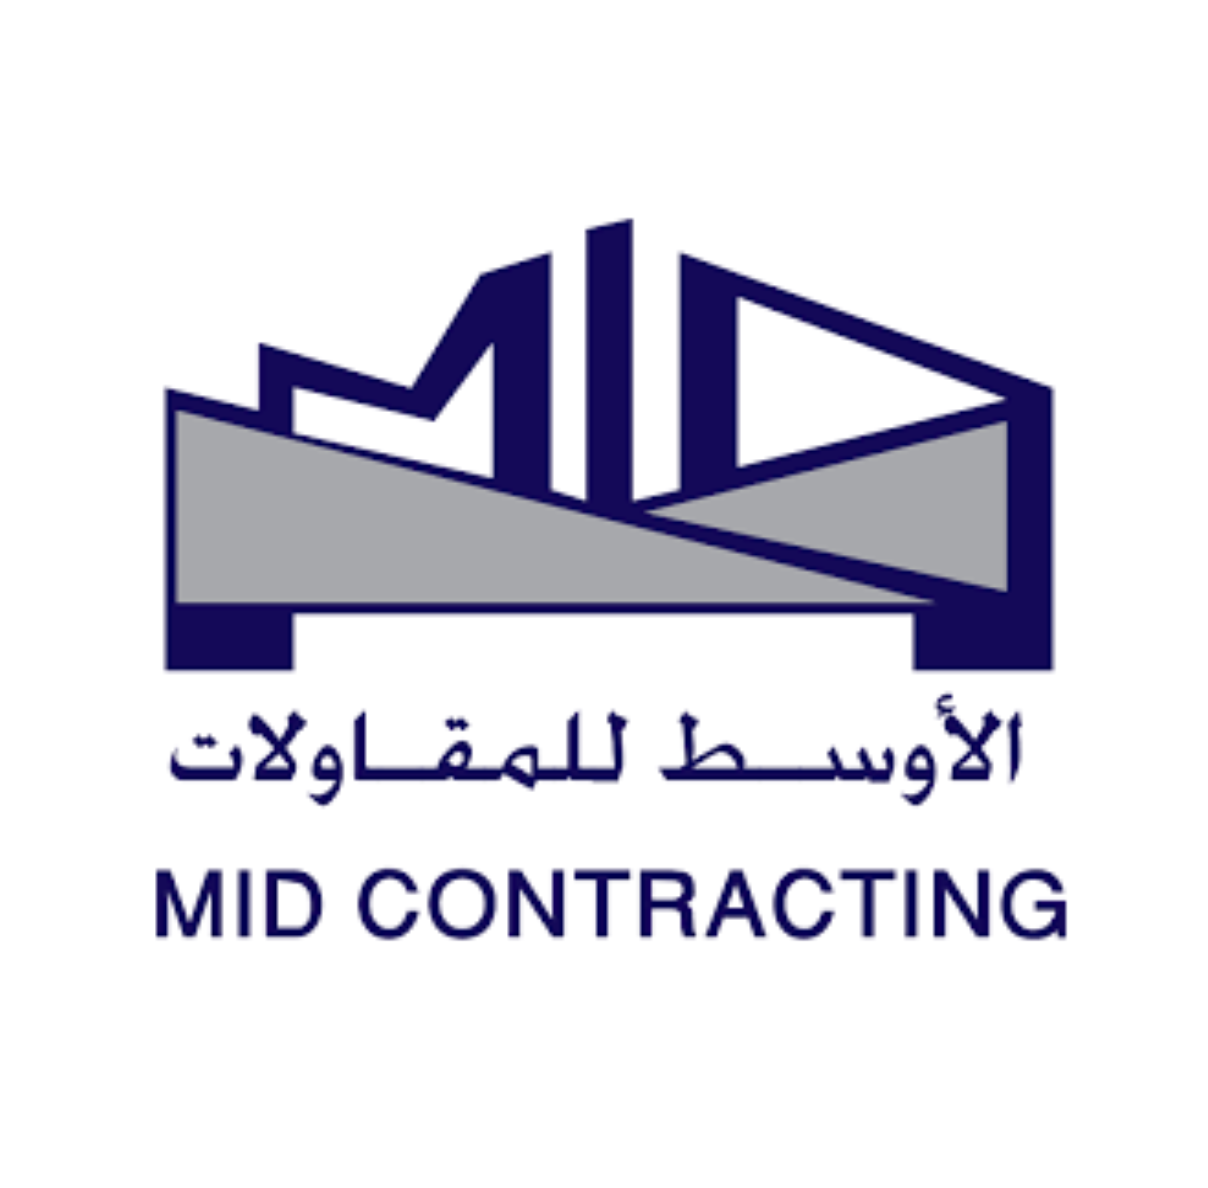 MID Contracting Careers Openings